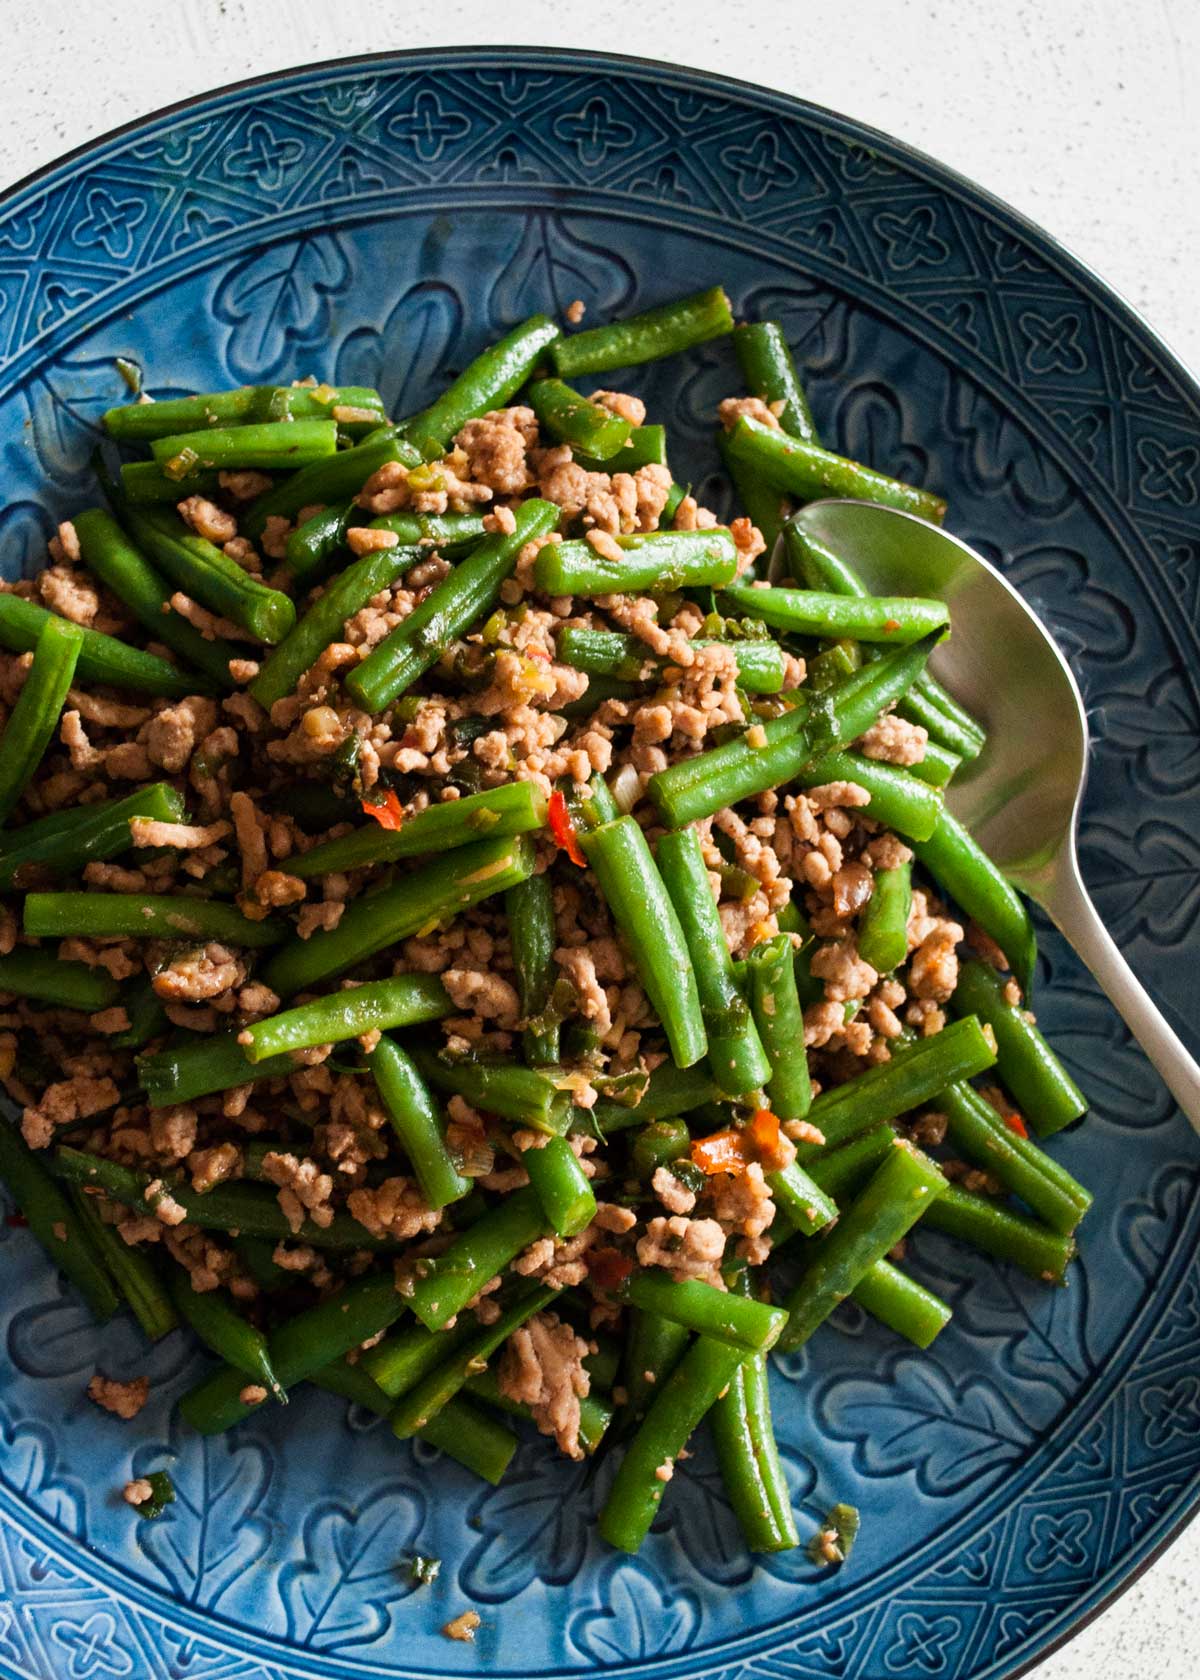 Beans and pork mince stir fry is the Japanese version of Chinese style dish which goes so well with rice. It's not as oily as Chinese style with milder spices.